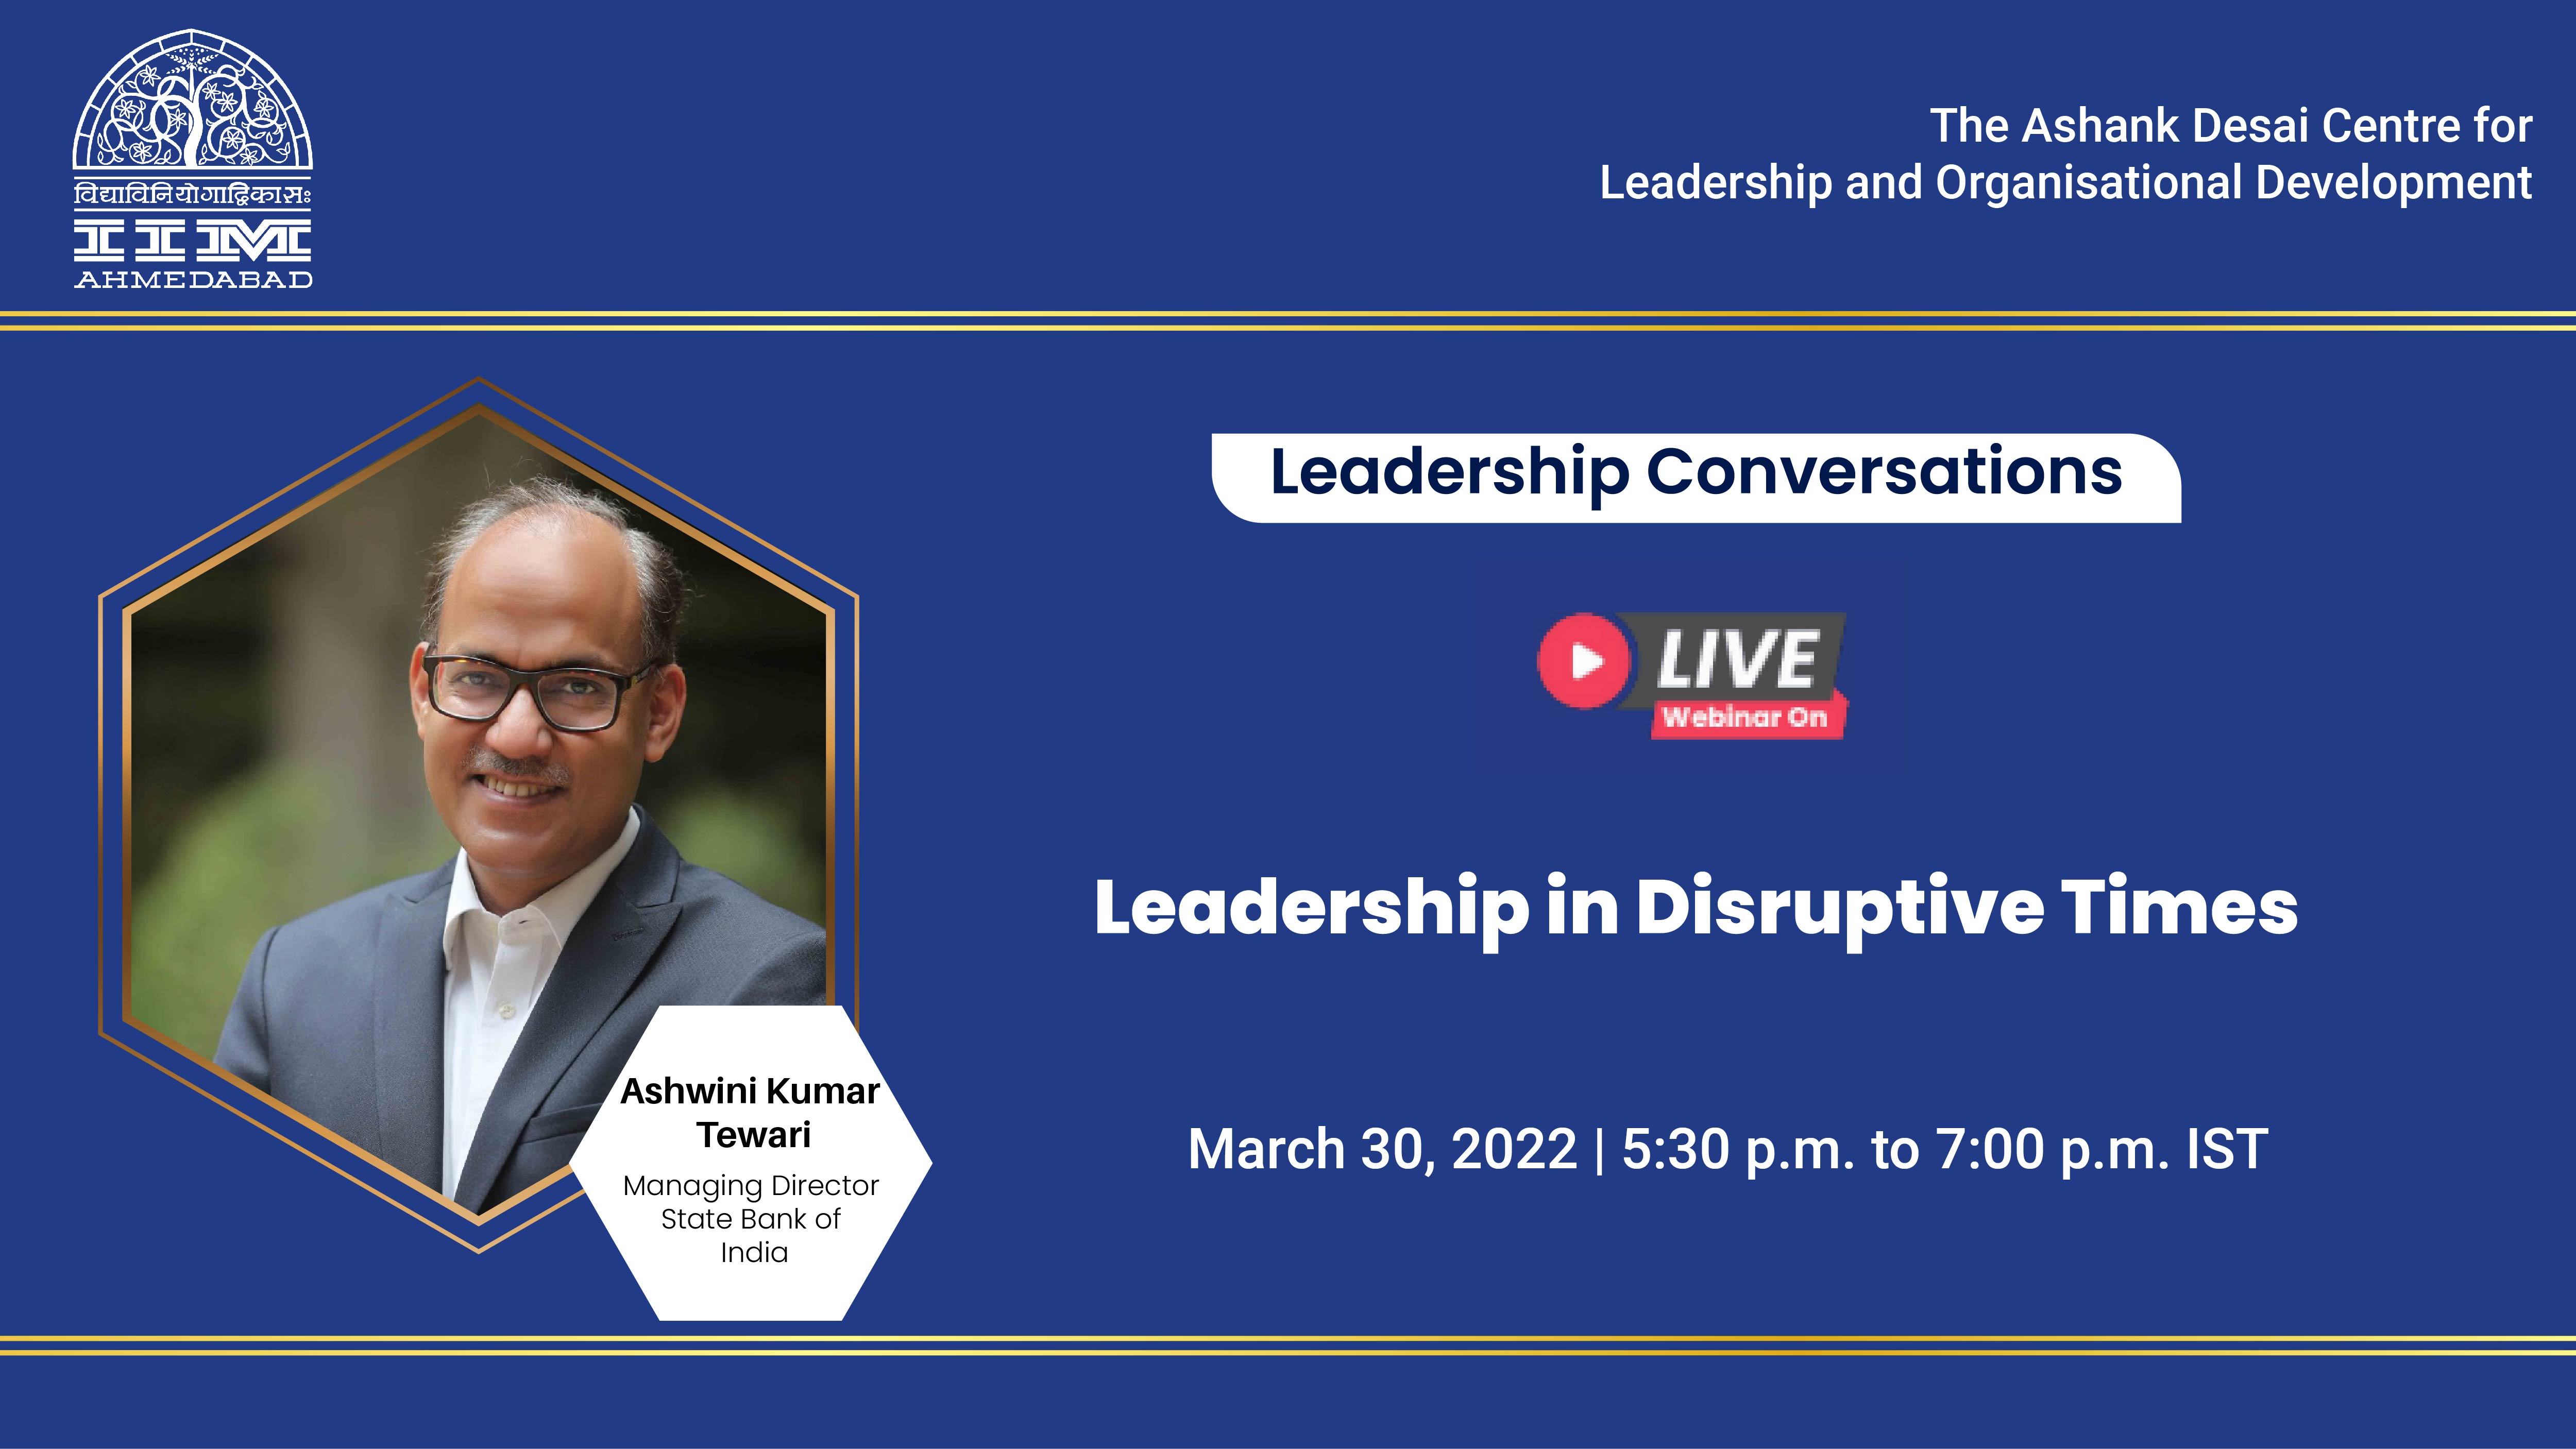 The Leadership Conversations on “Leadership in Disruptive Times”